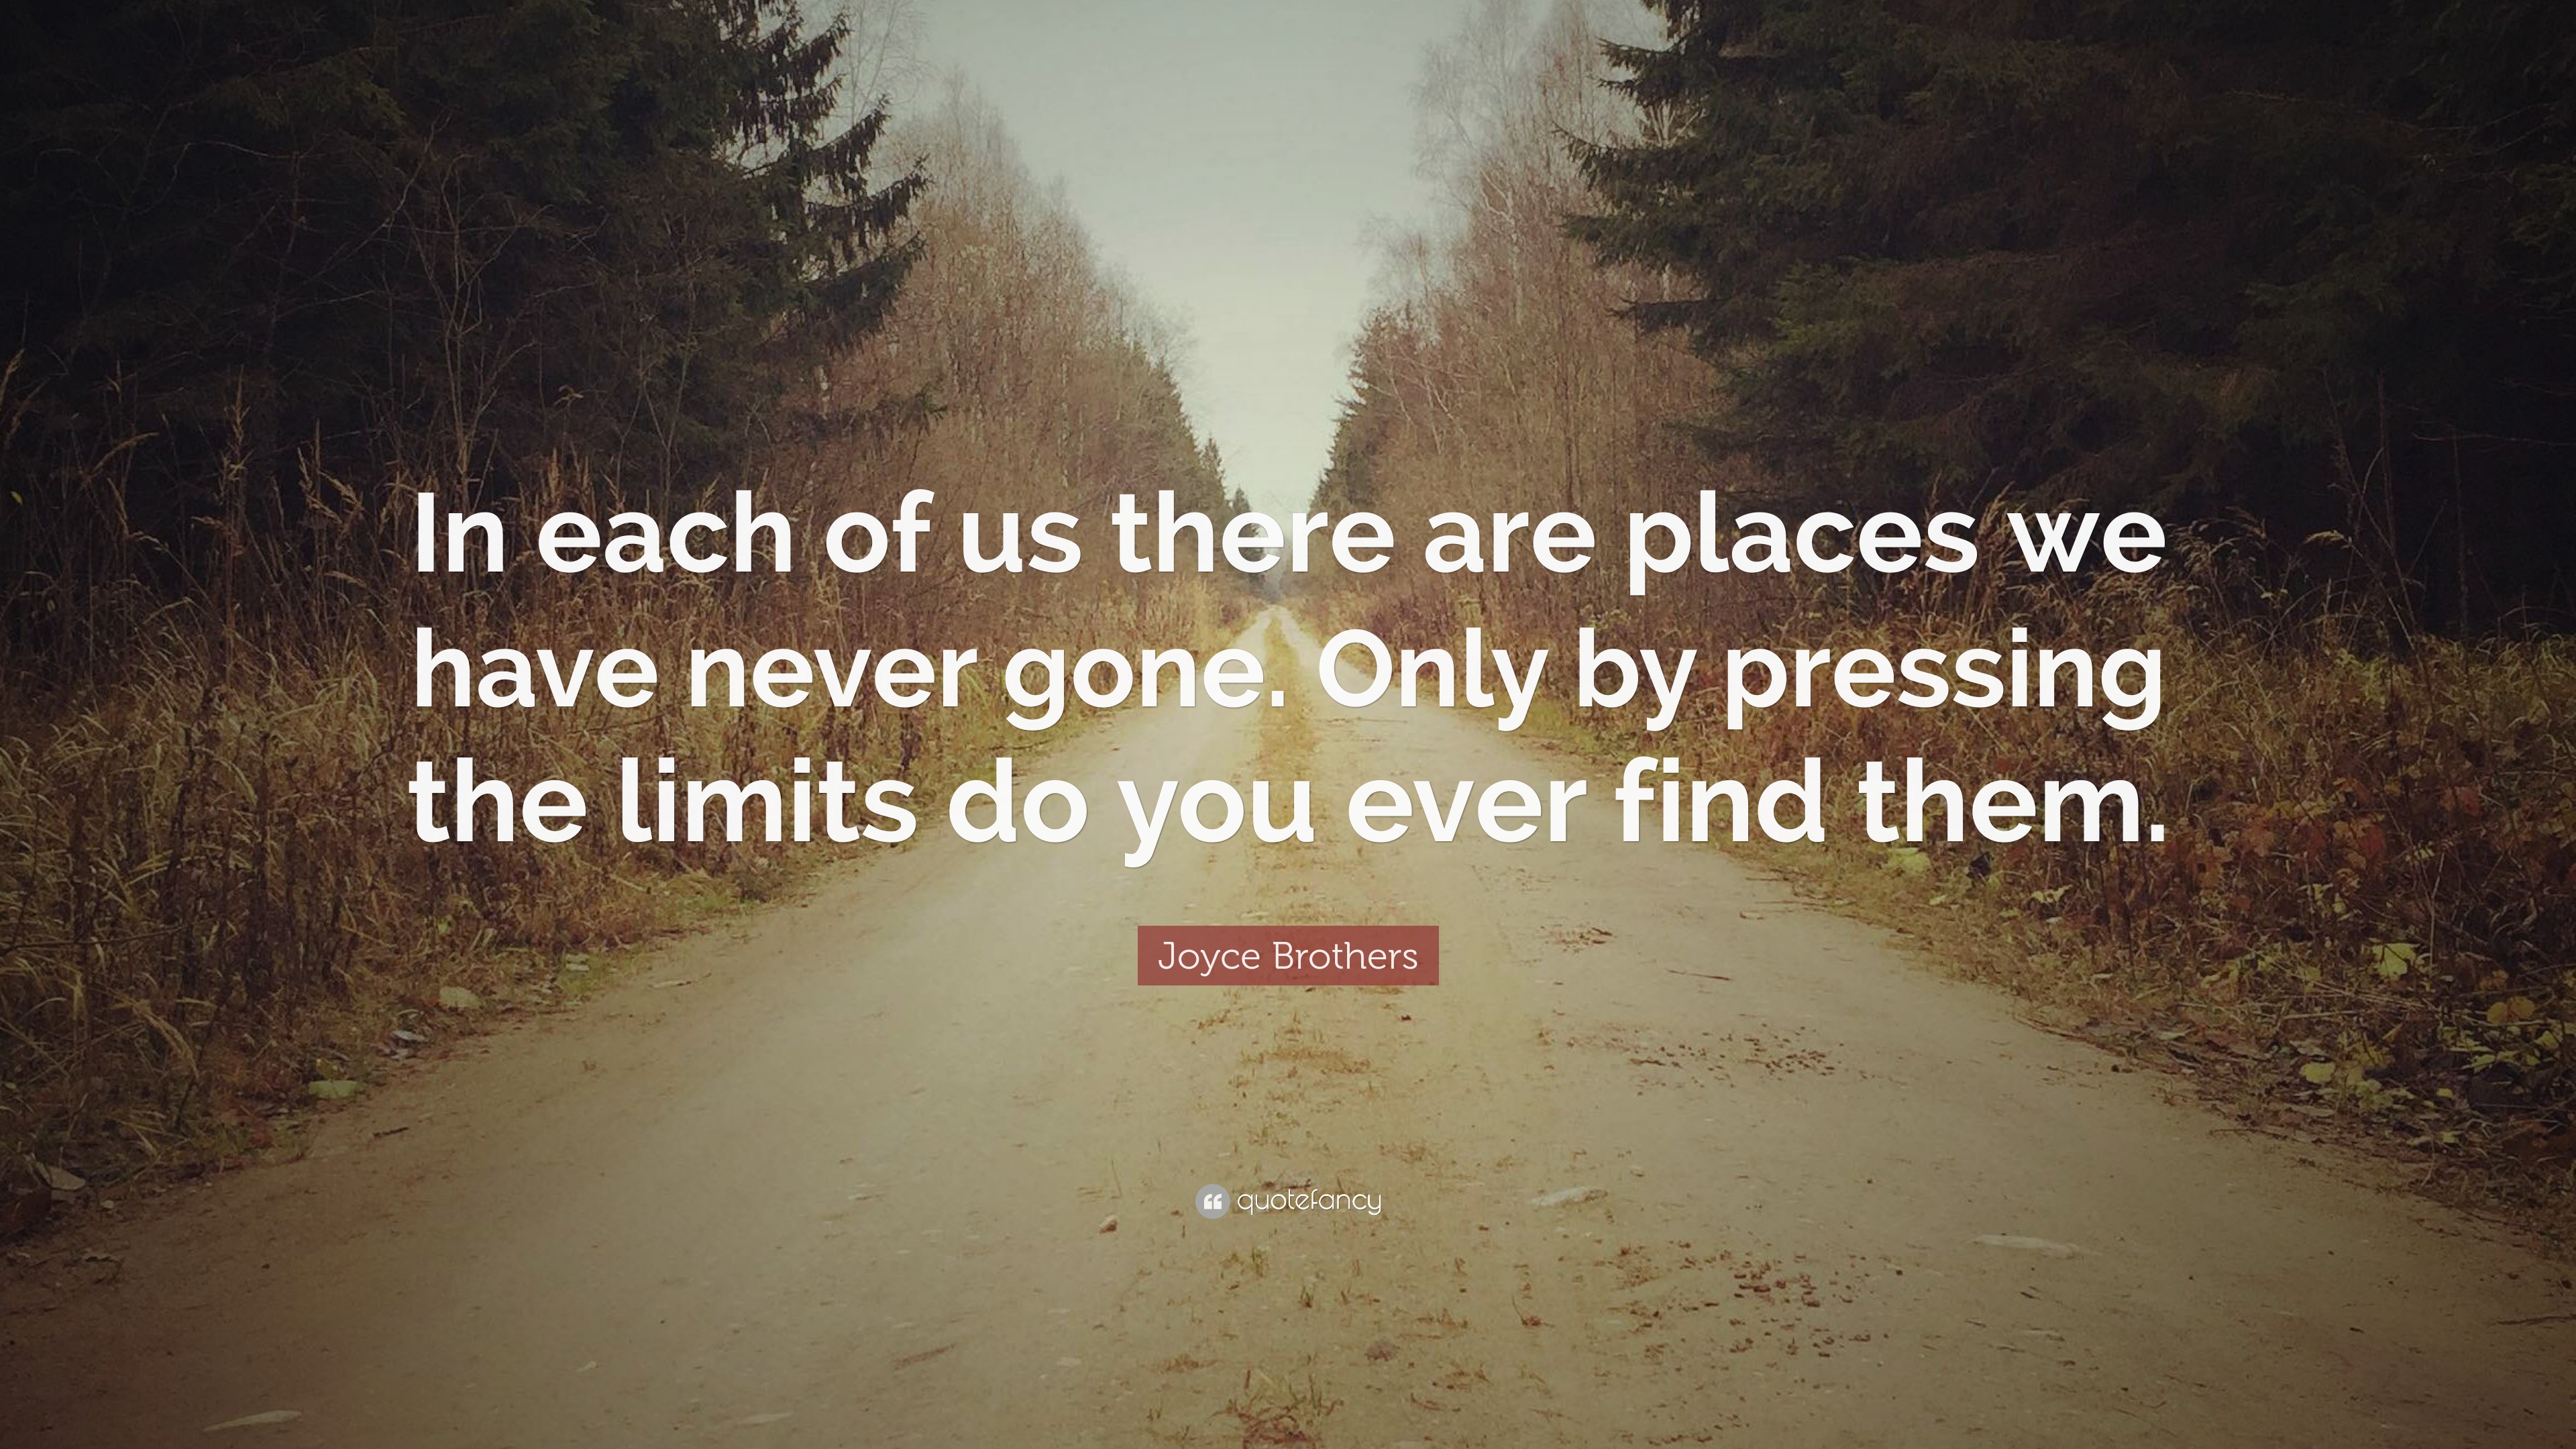 Joyce Brothers Quote: “In each of us there are places we have never ...